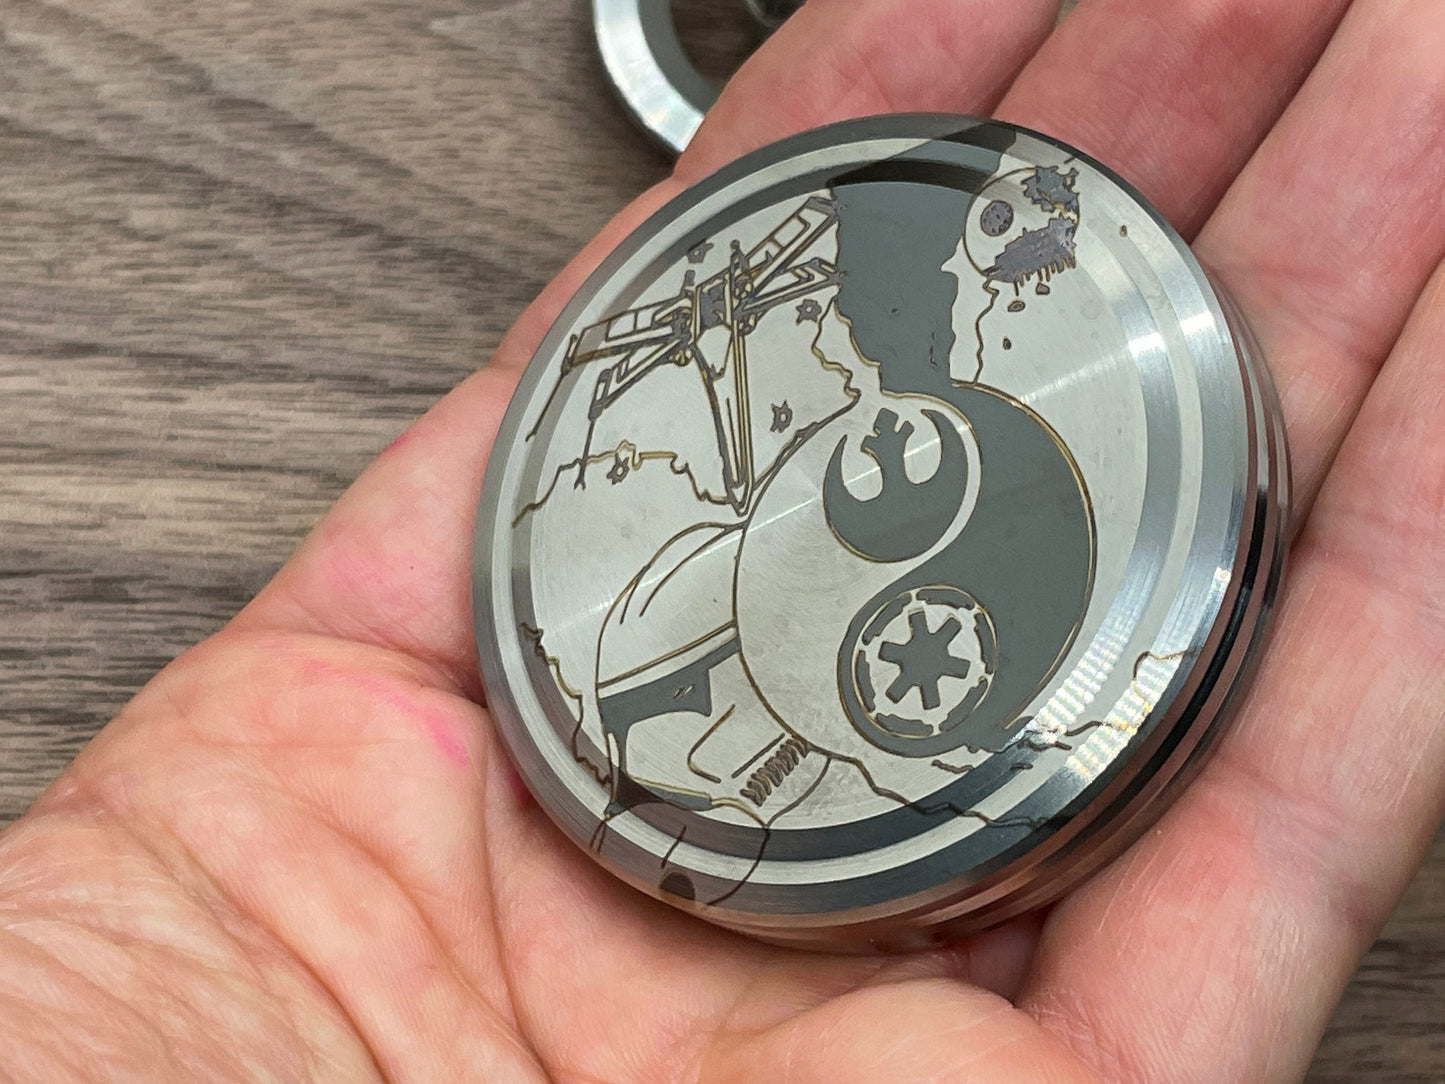 Star Wars engraved Titanium Spin base for Spinning Tops & Coins